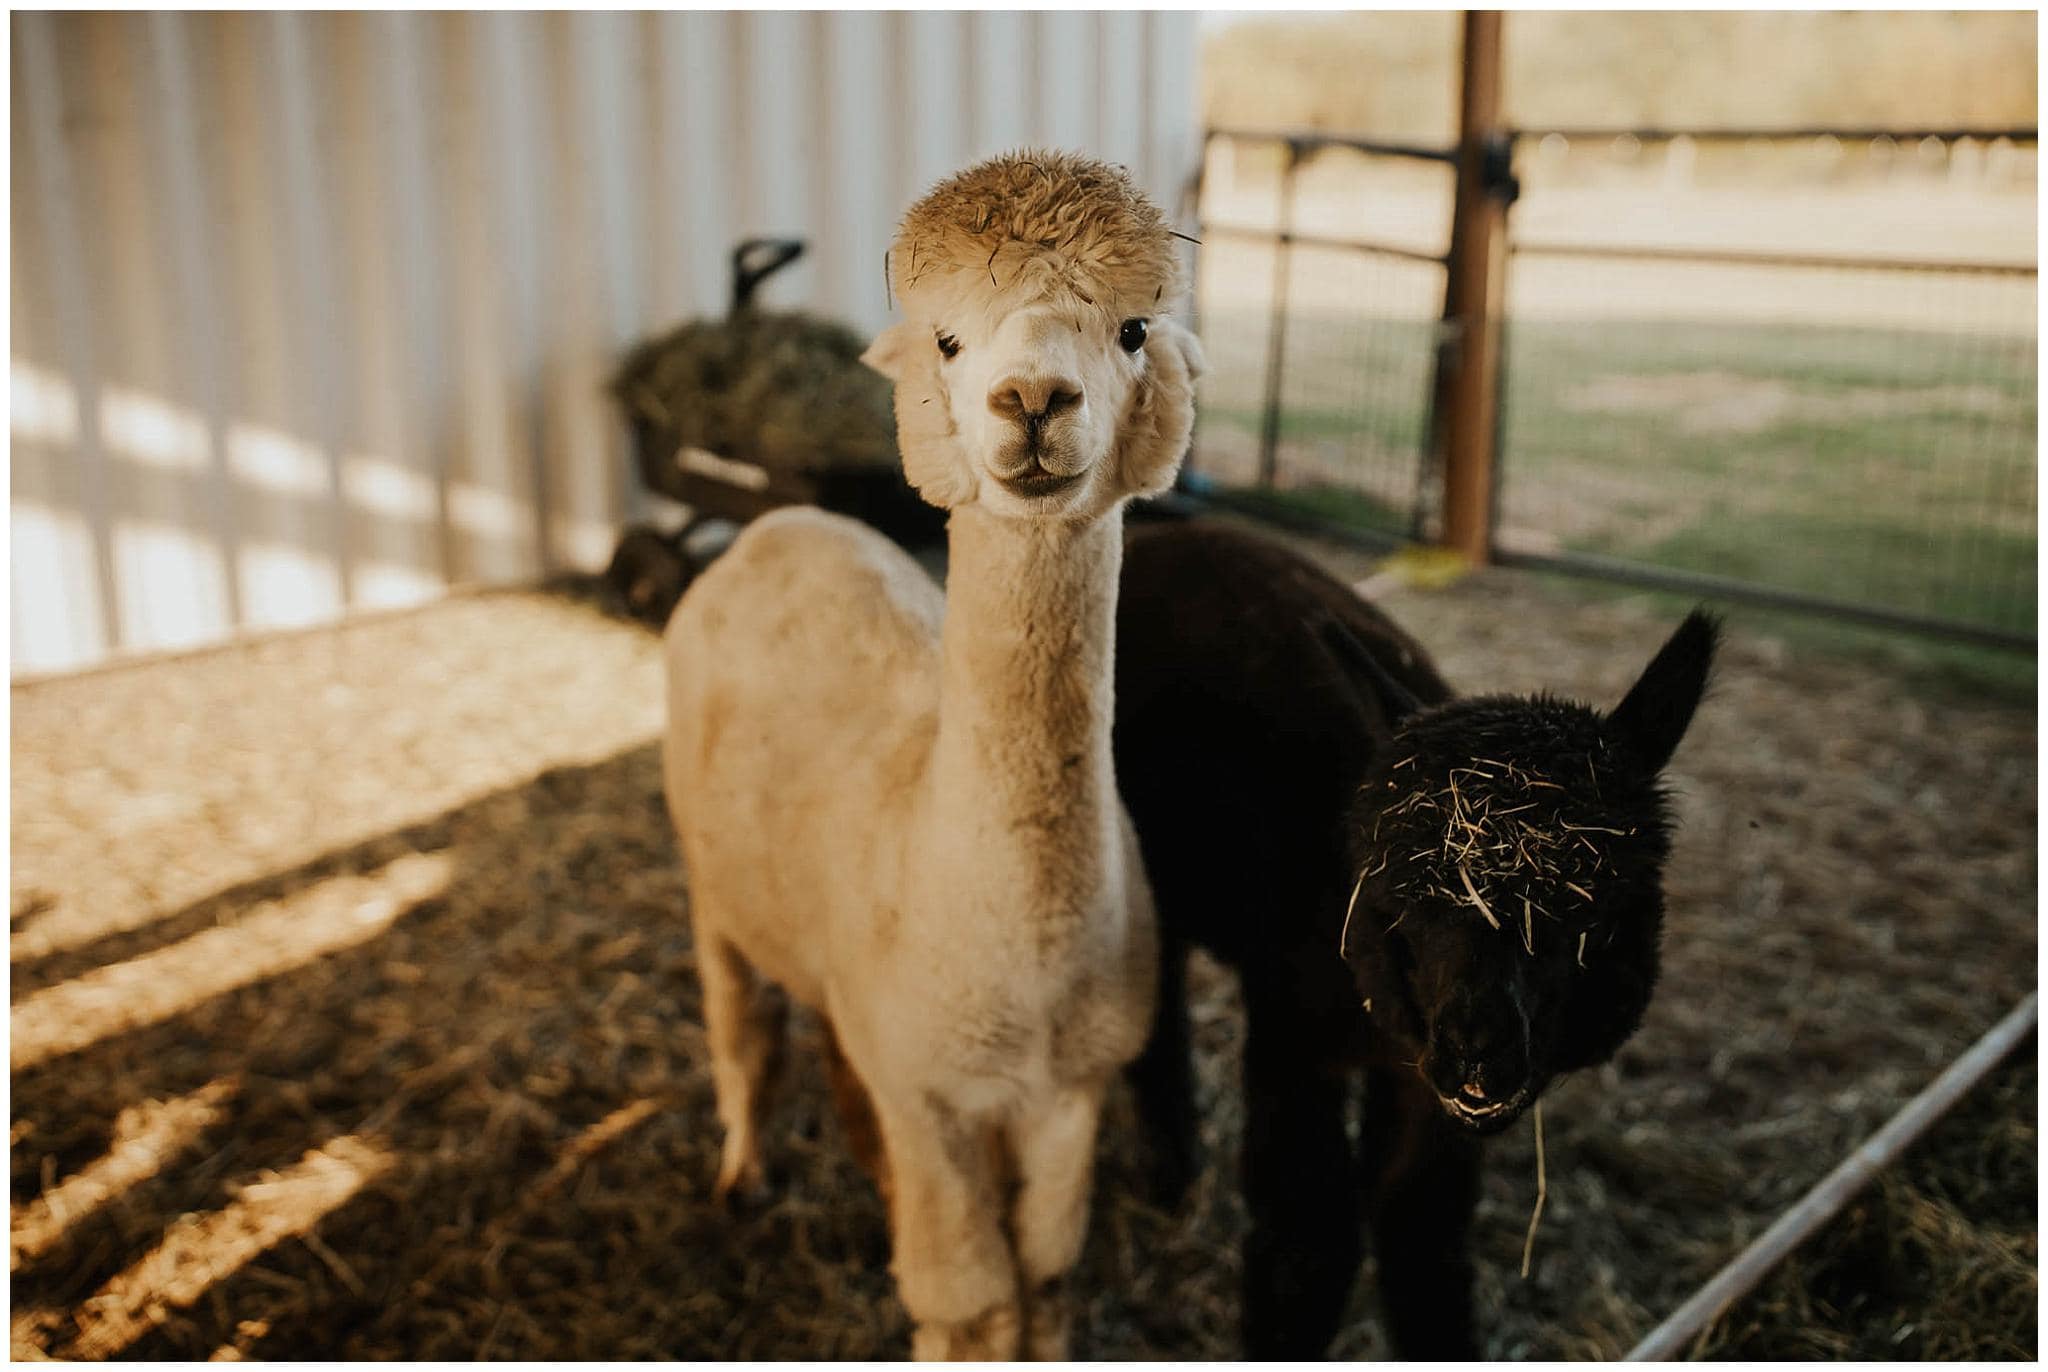 white and black alpaca in their pen on the farm